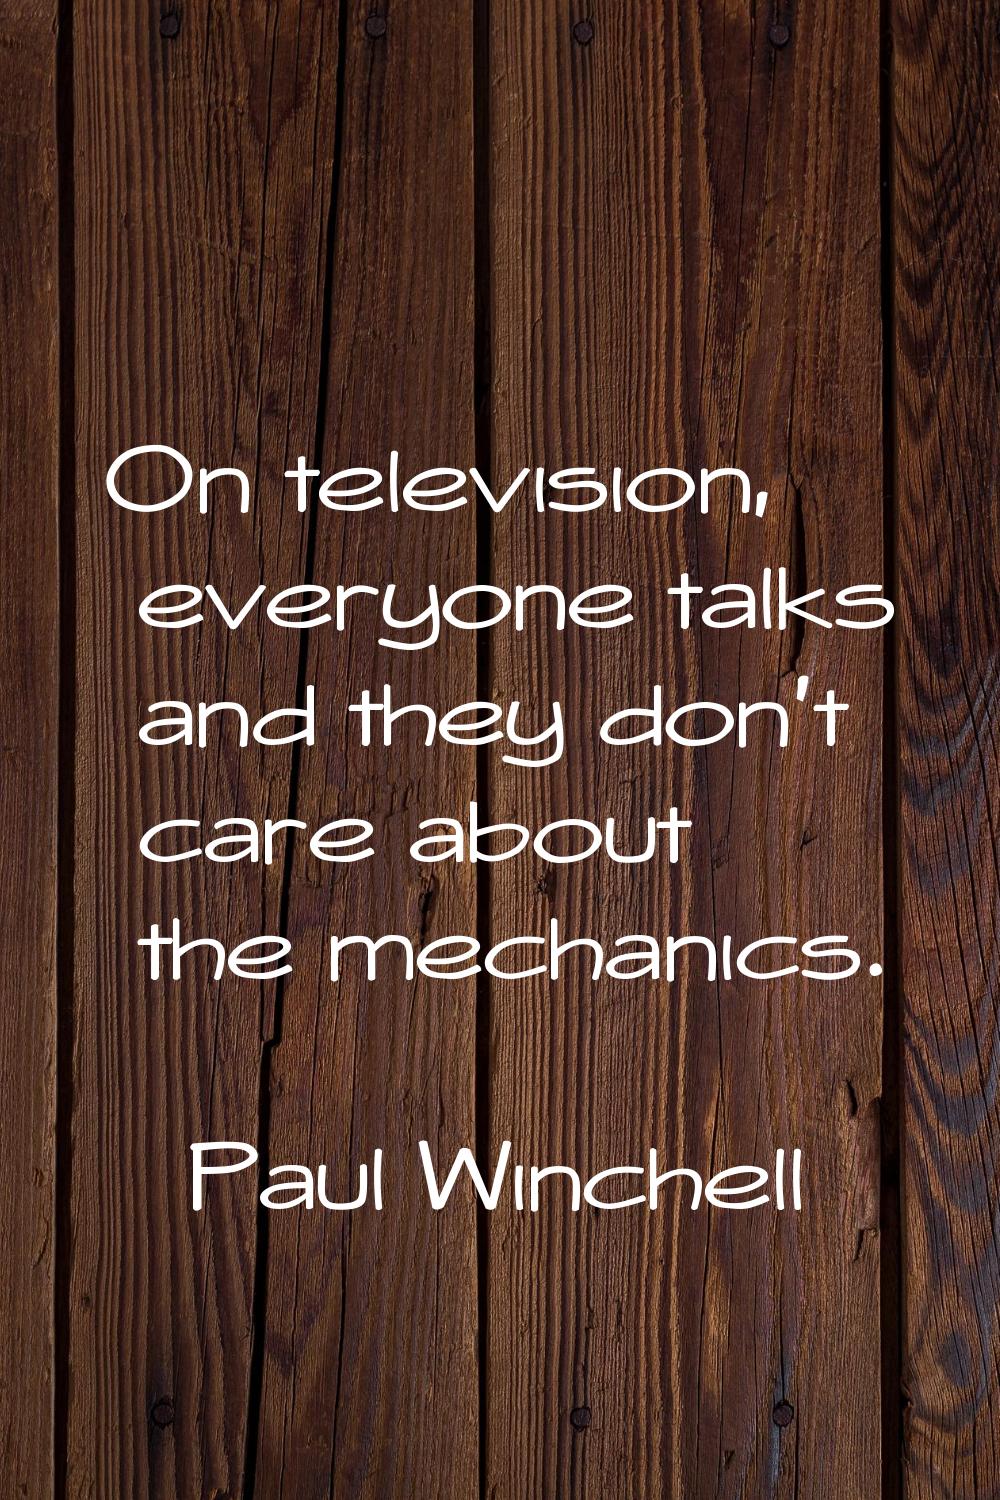 On television, everyone talks and they don't care about the mechanics.